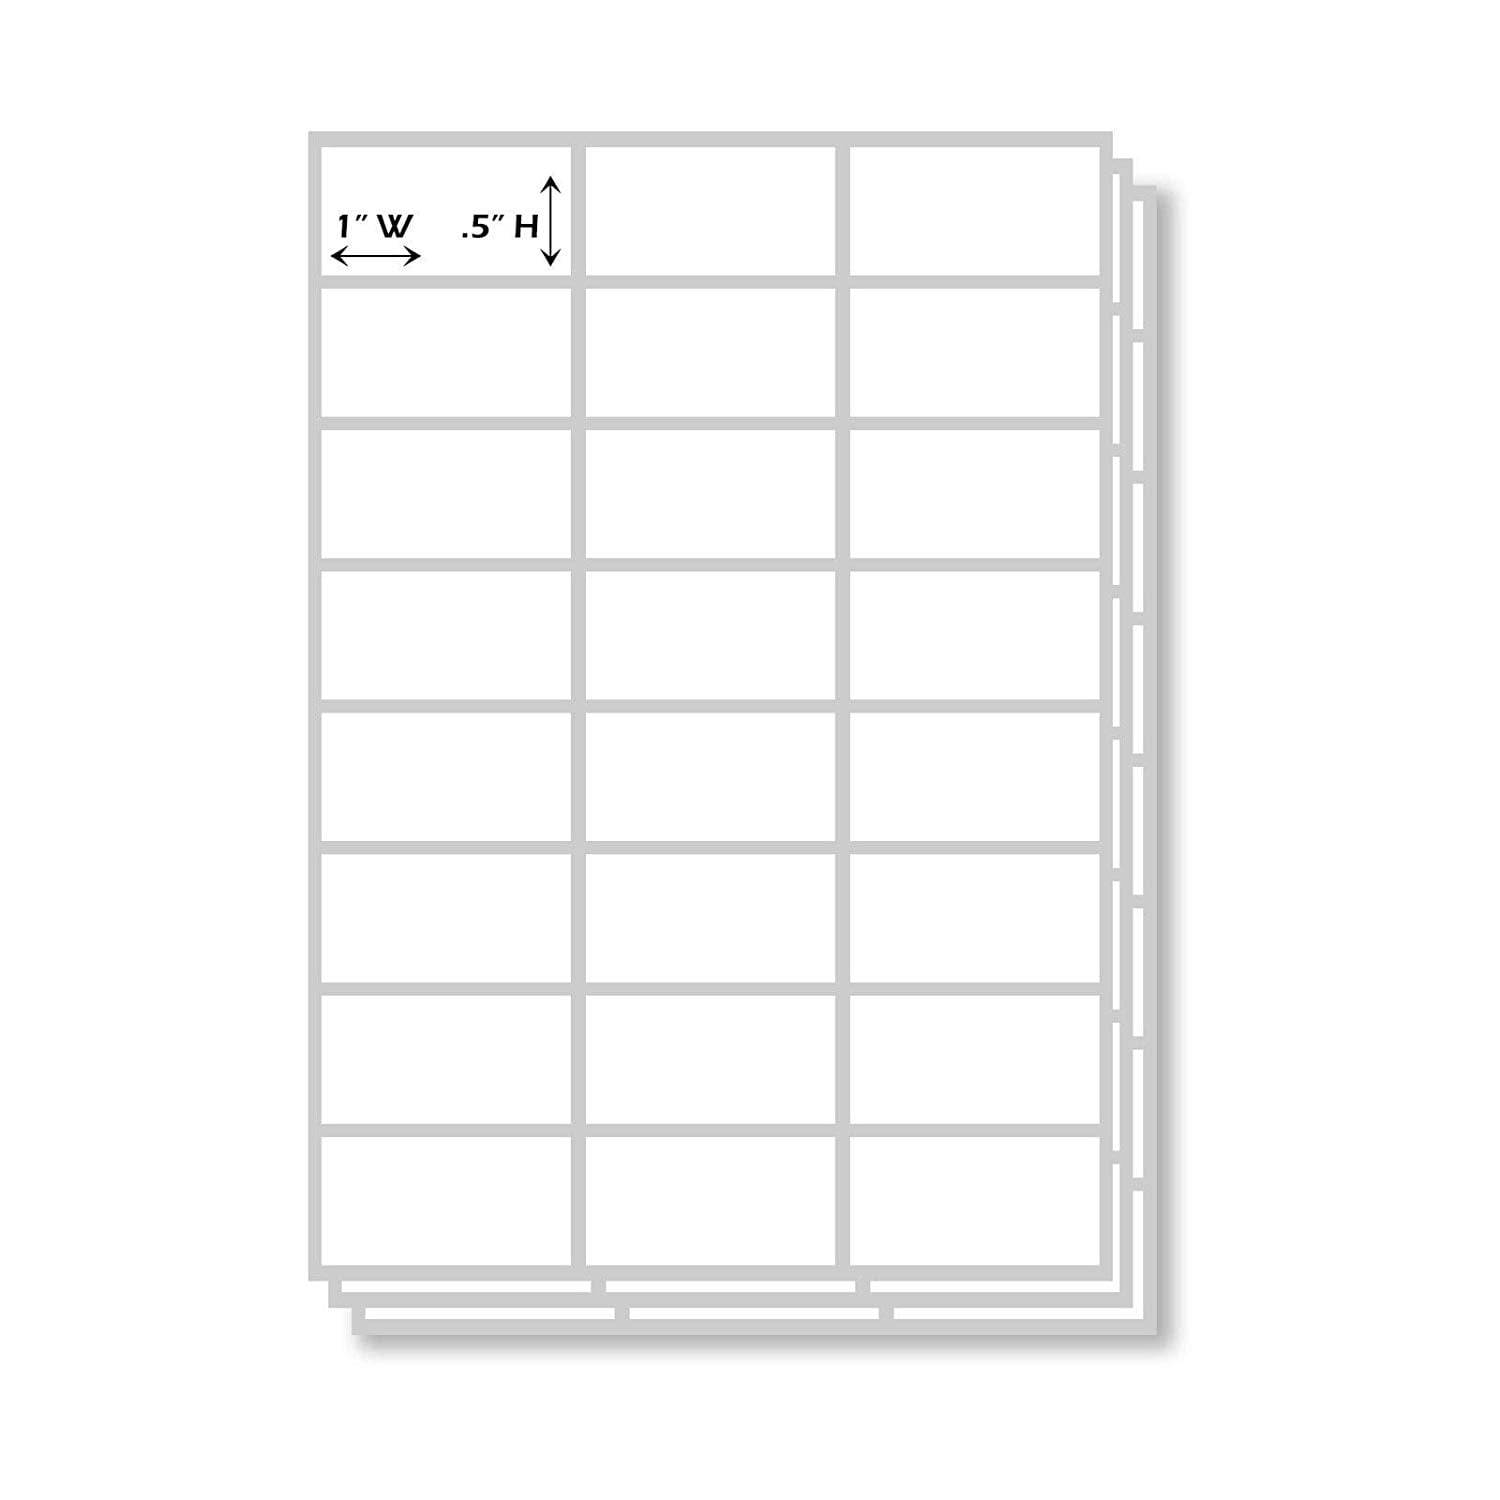 35 51x25mm 2"x1" Rectangular White Opaque Cover-Up Stickers Sticky Labels BLC552 